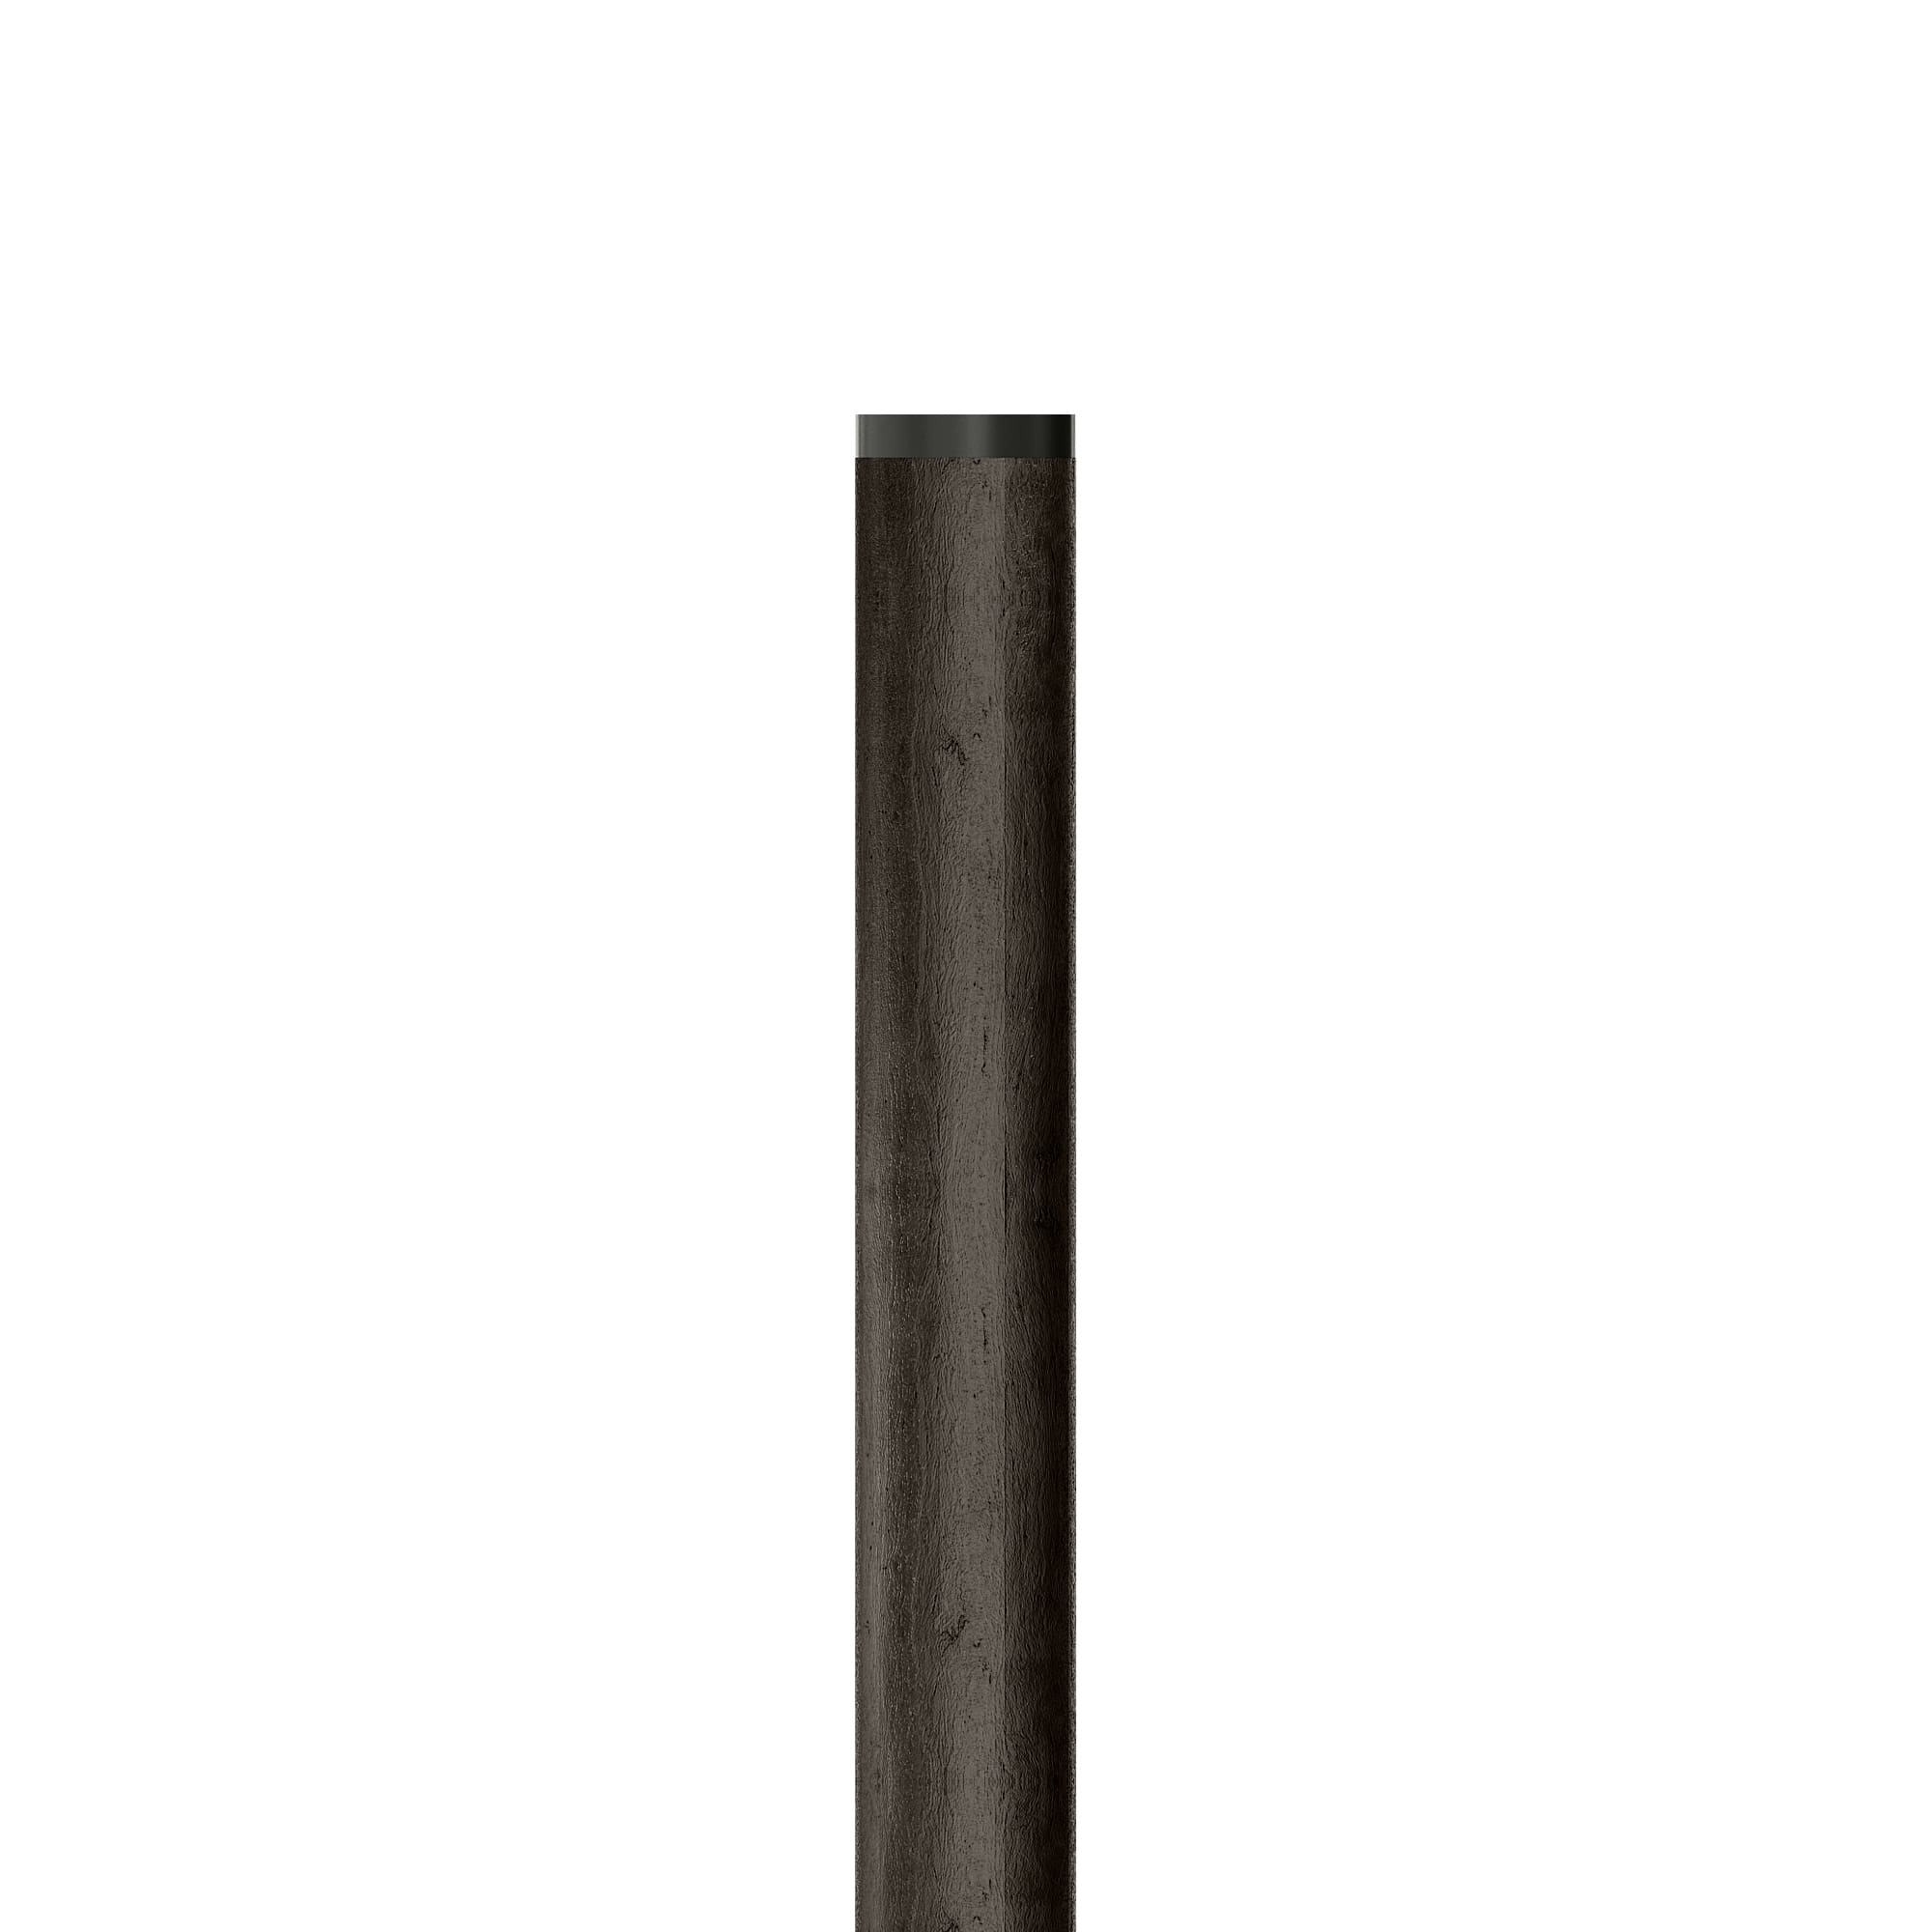 Wooden pole - Cylindrical